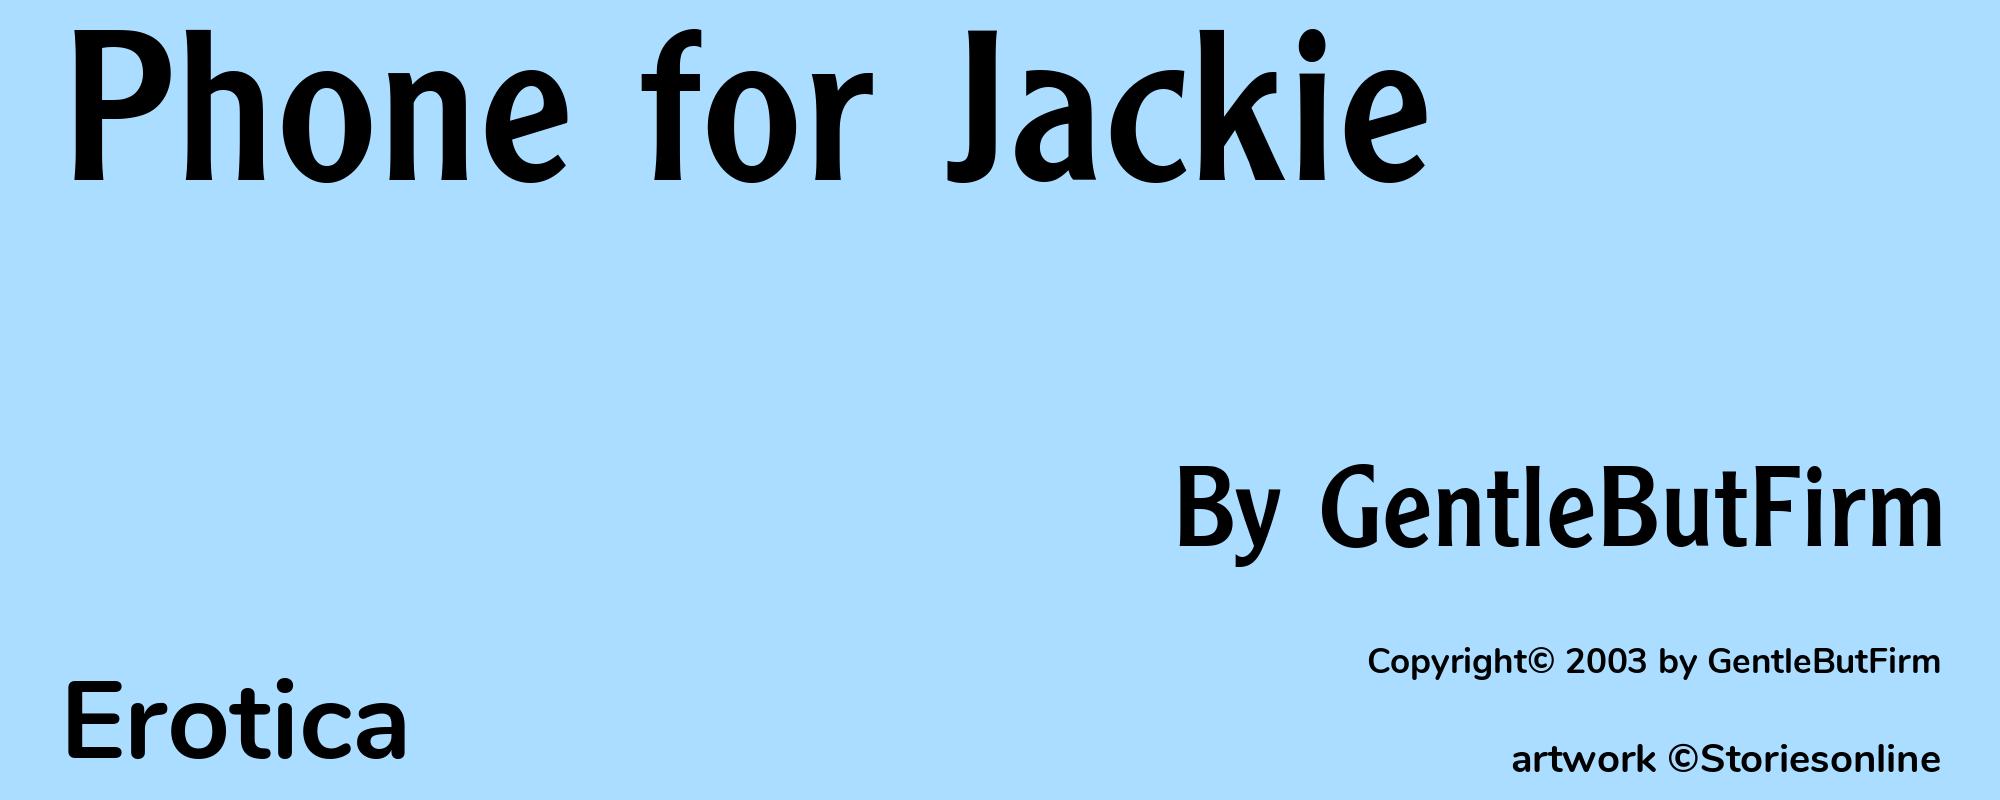 Phone for Jackie - Cover